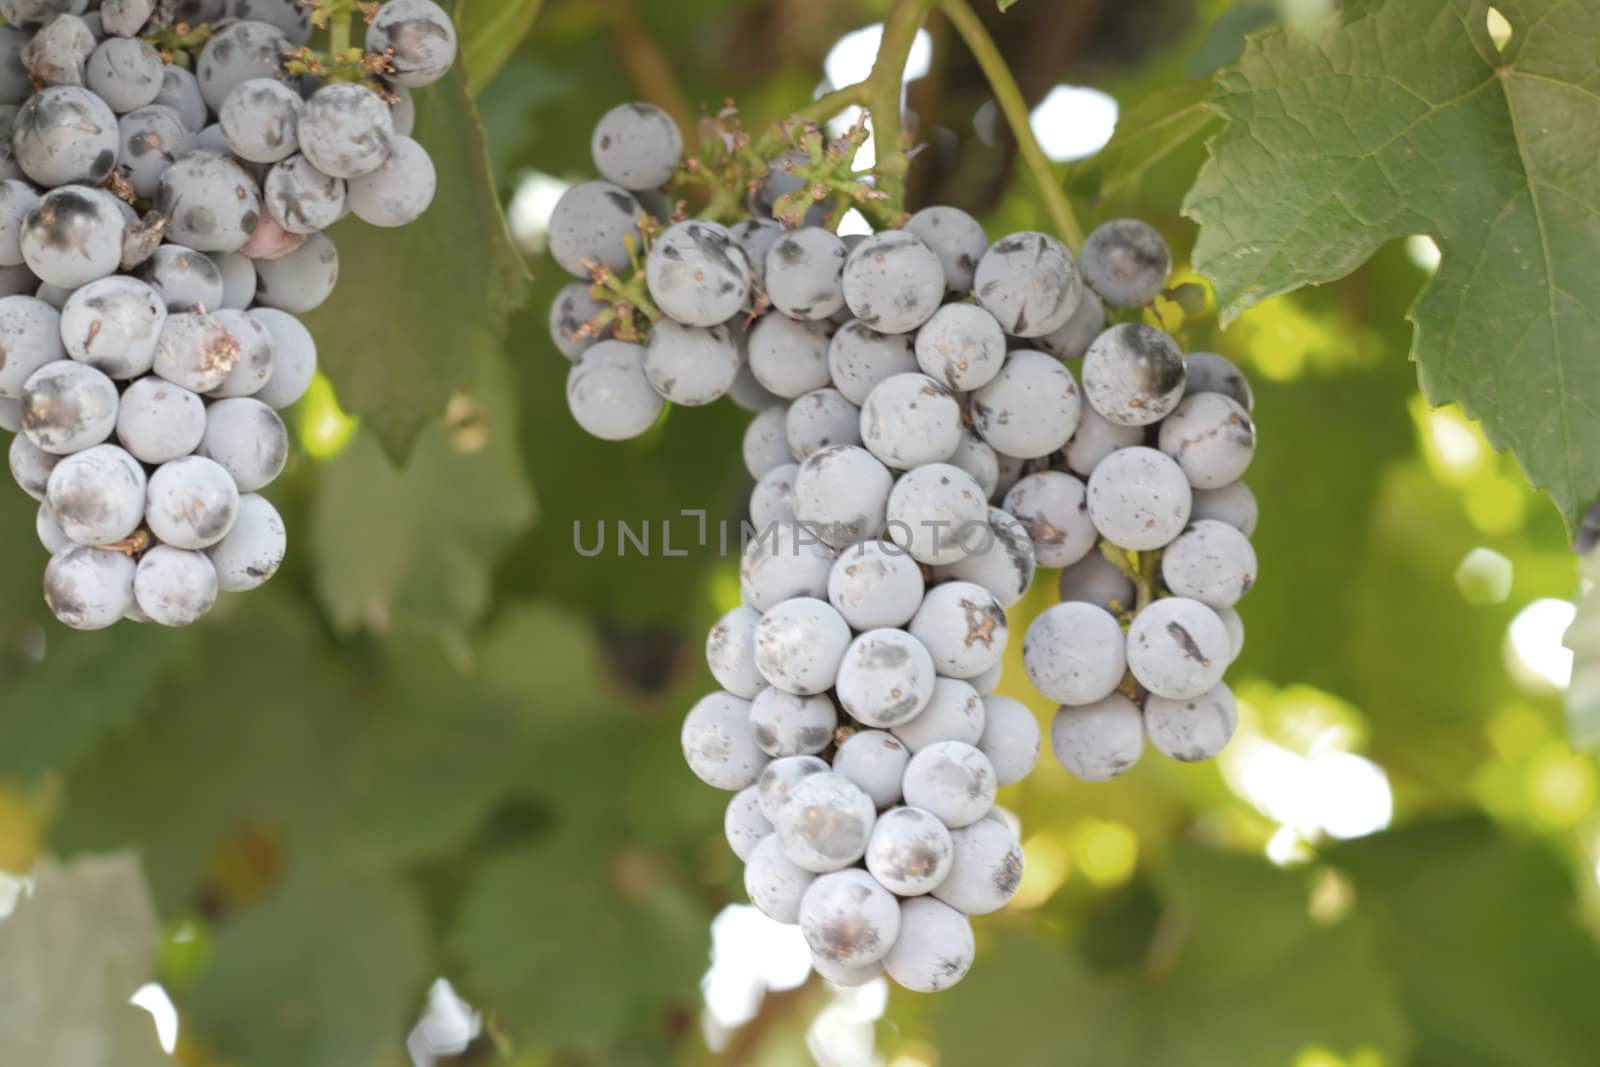 Bunches of grapes. Shallow DOF.